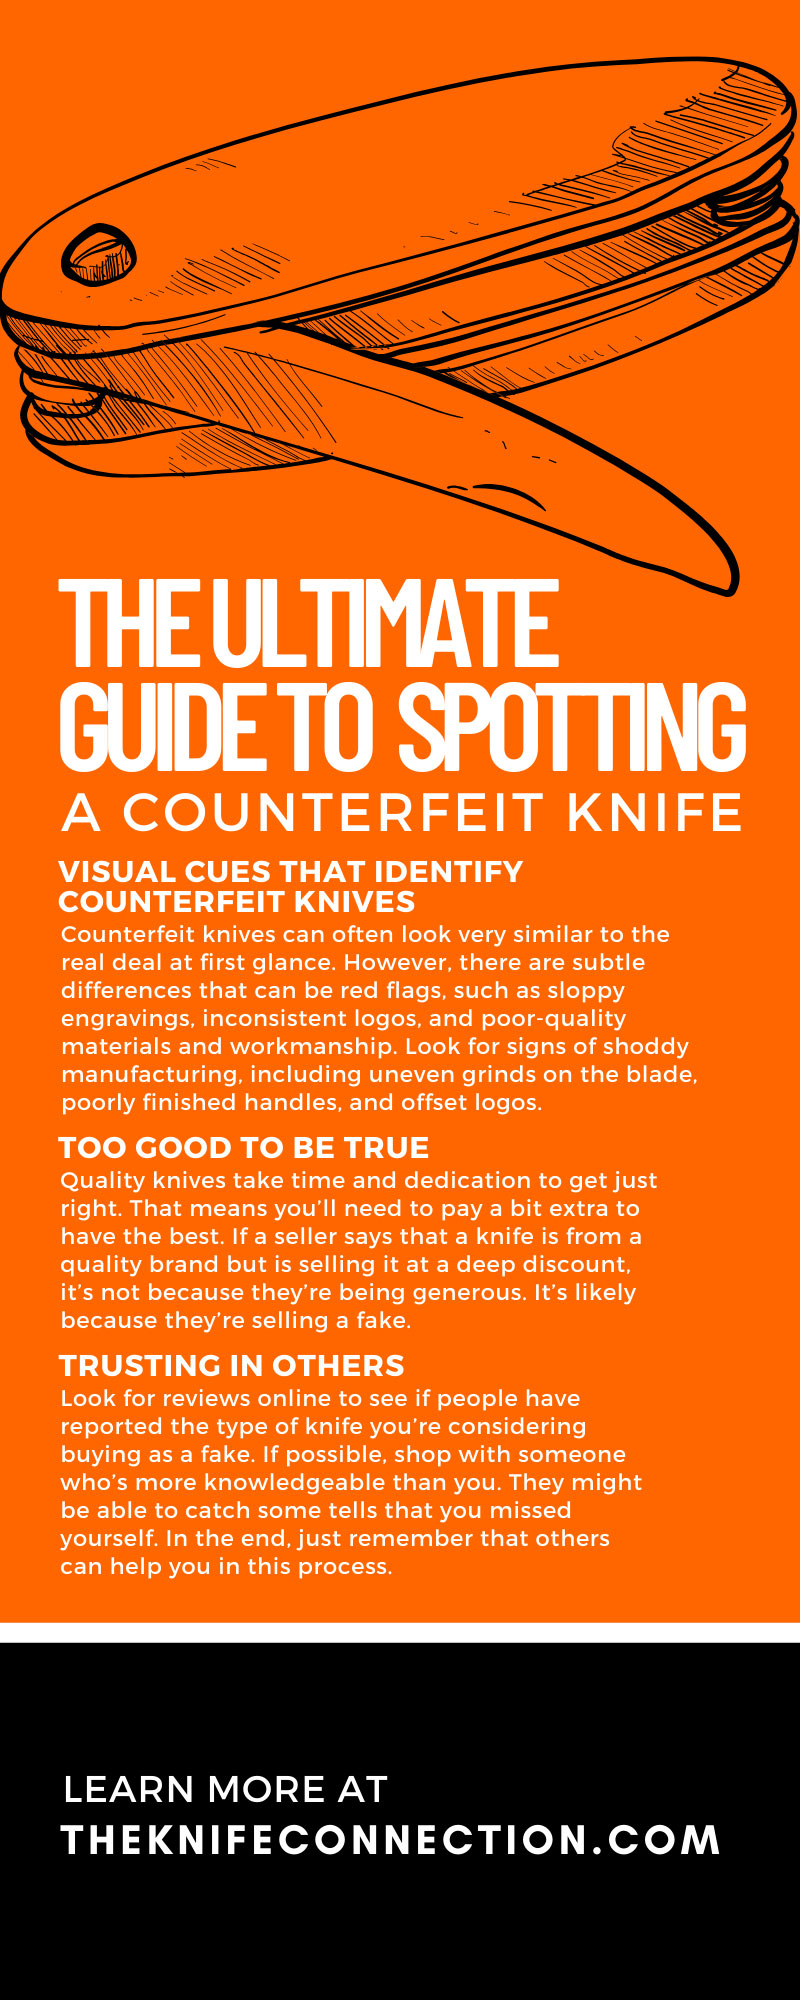 The Ultimate Guide to Spotting a Counterfeit Knife